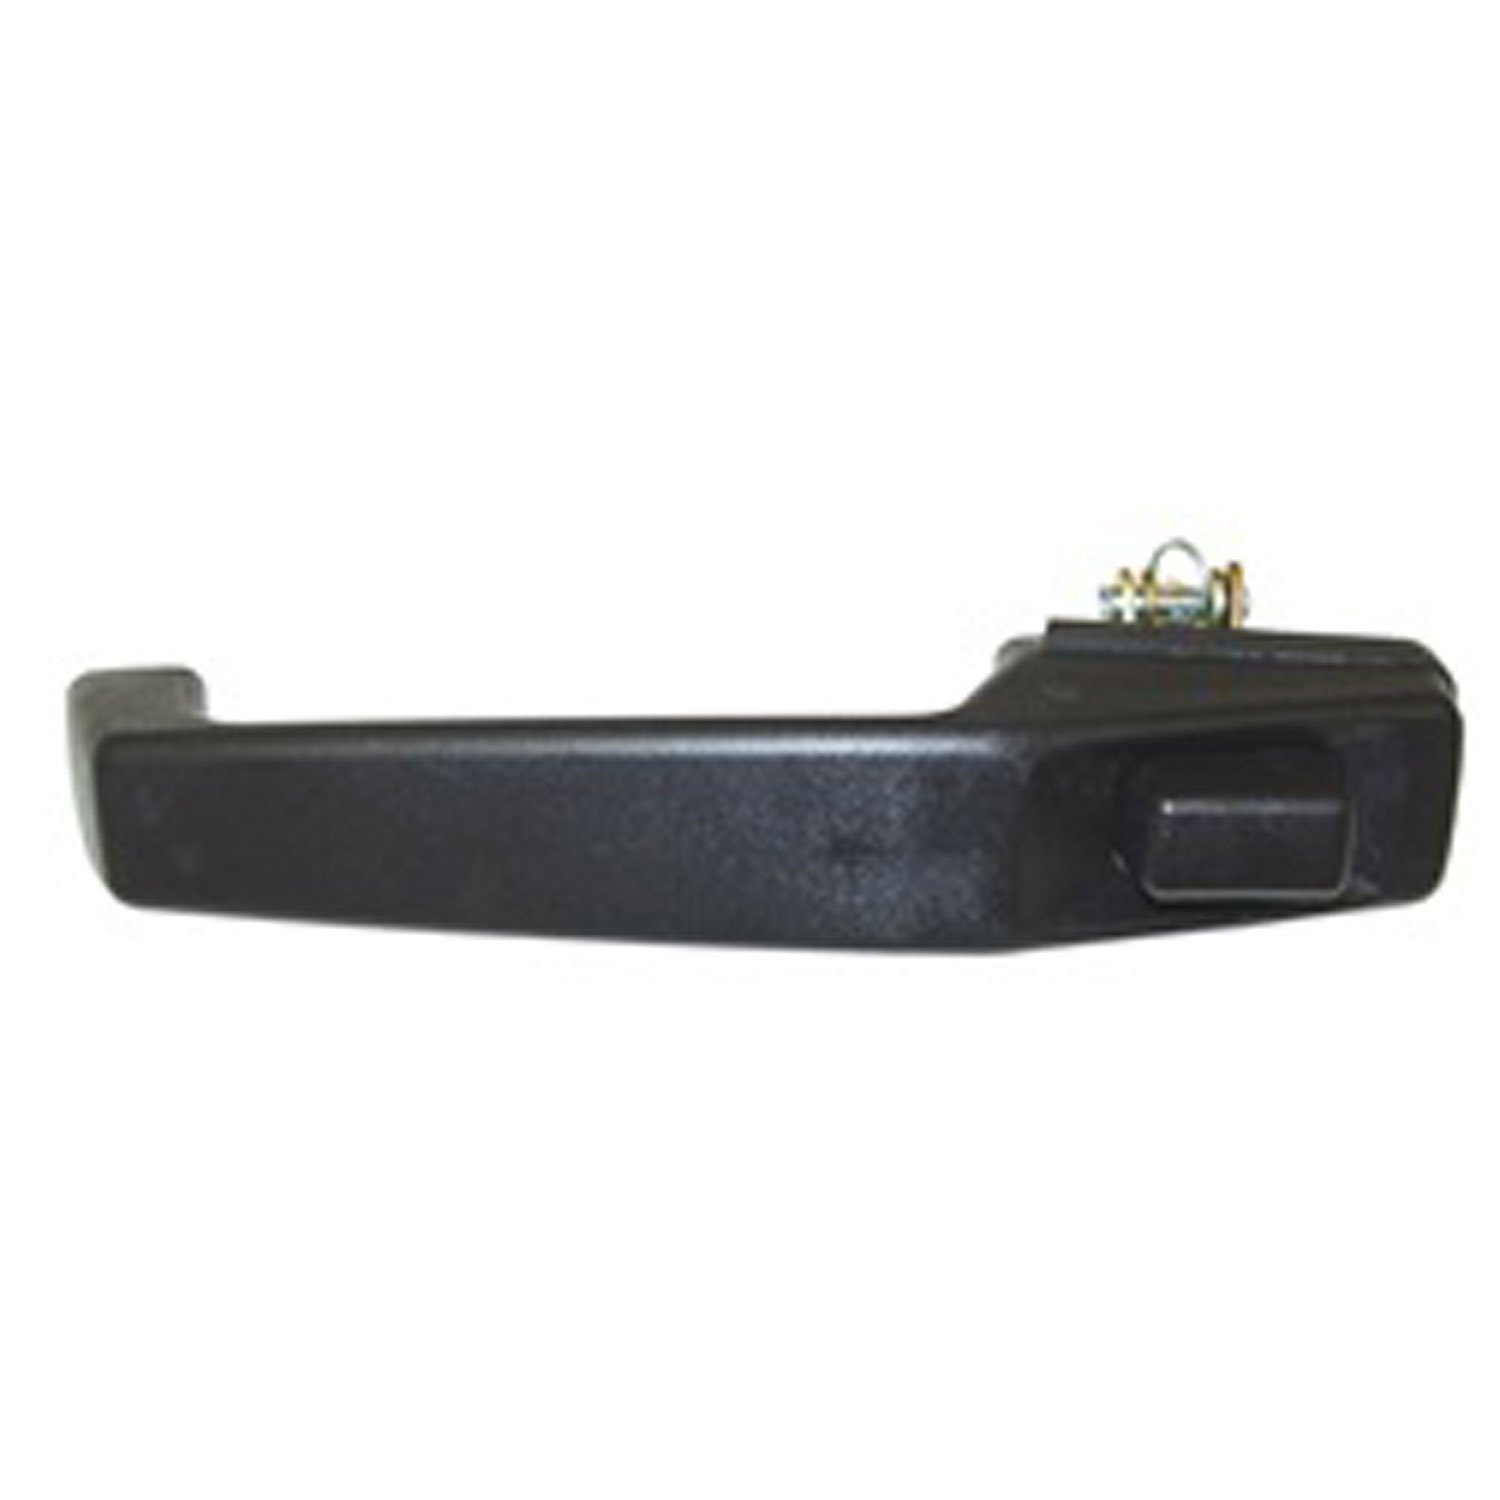 This black door handle from Omix-ADA fits the right front or rear doors on 84-96 Jeep Cherokee XJ.